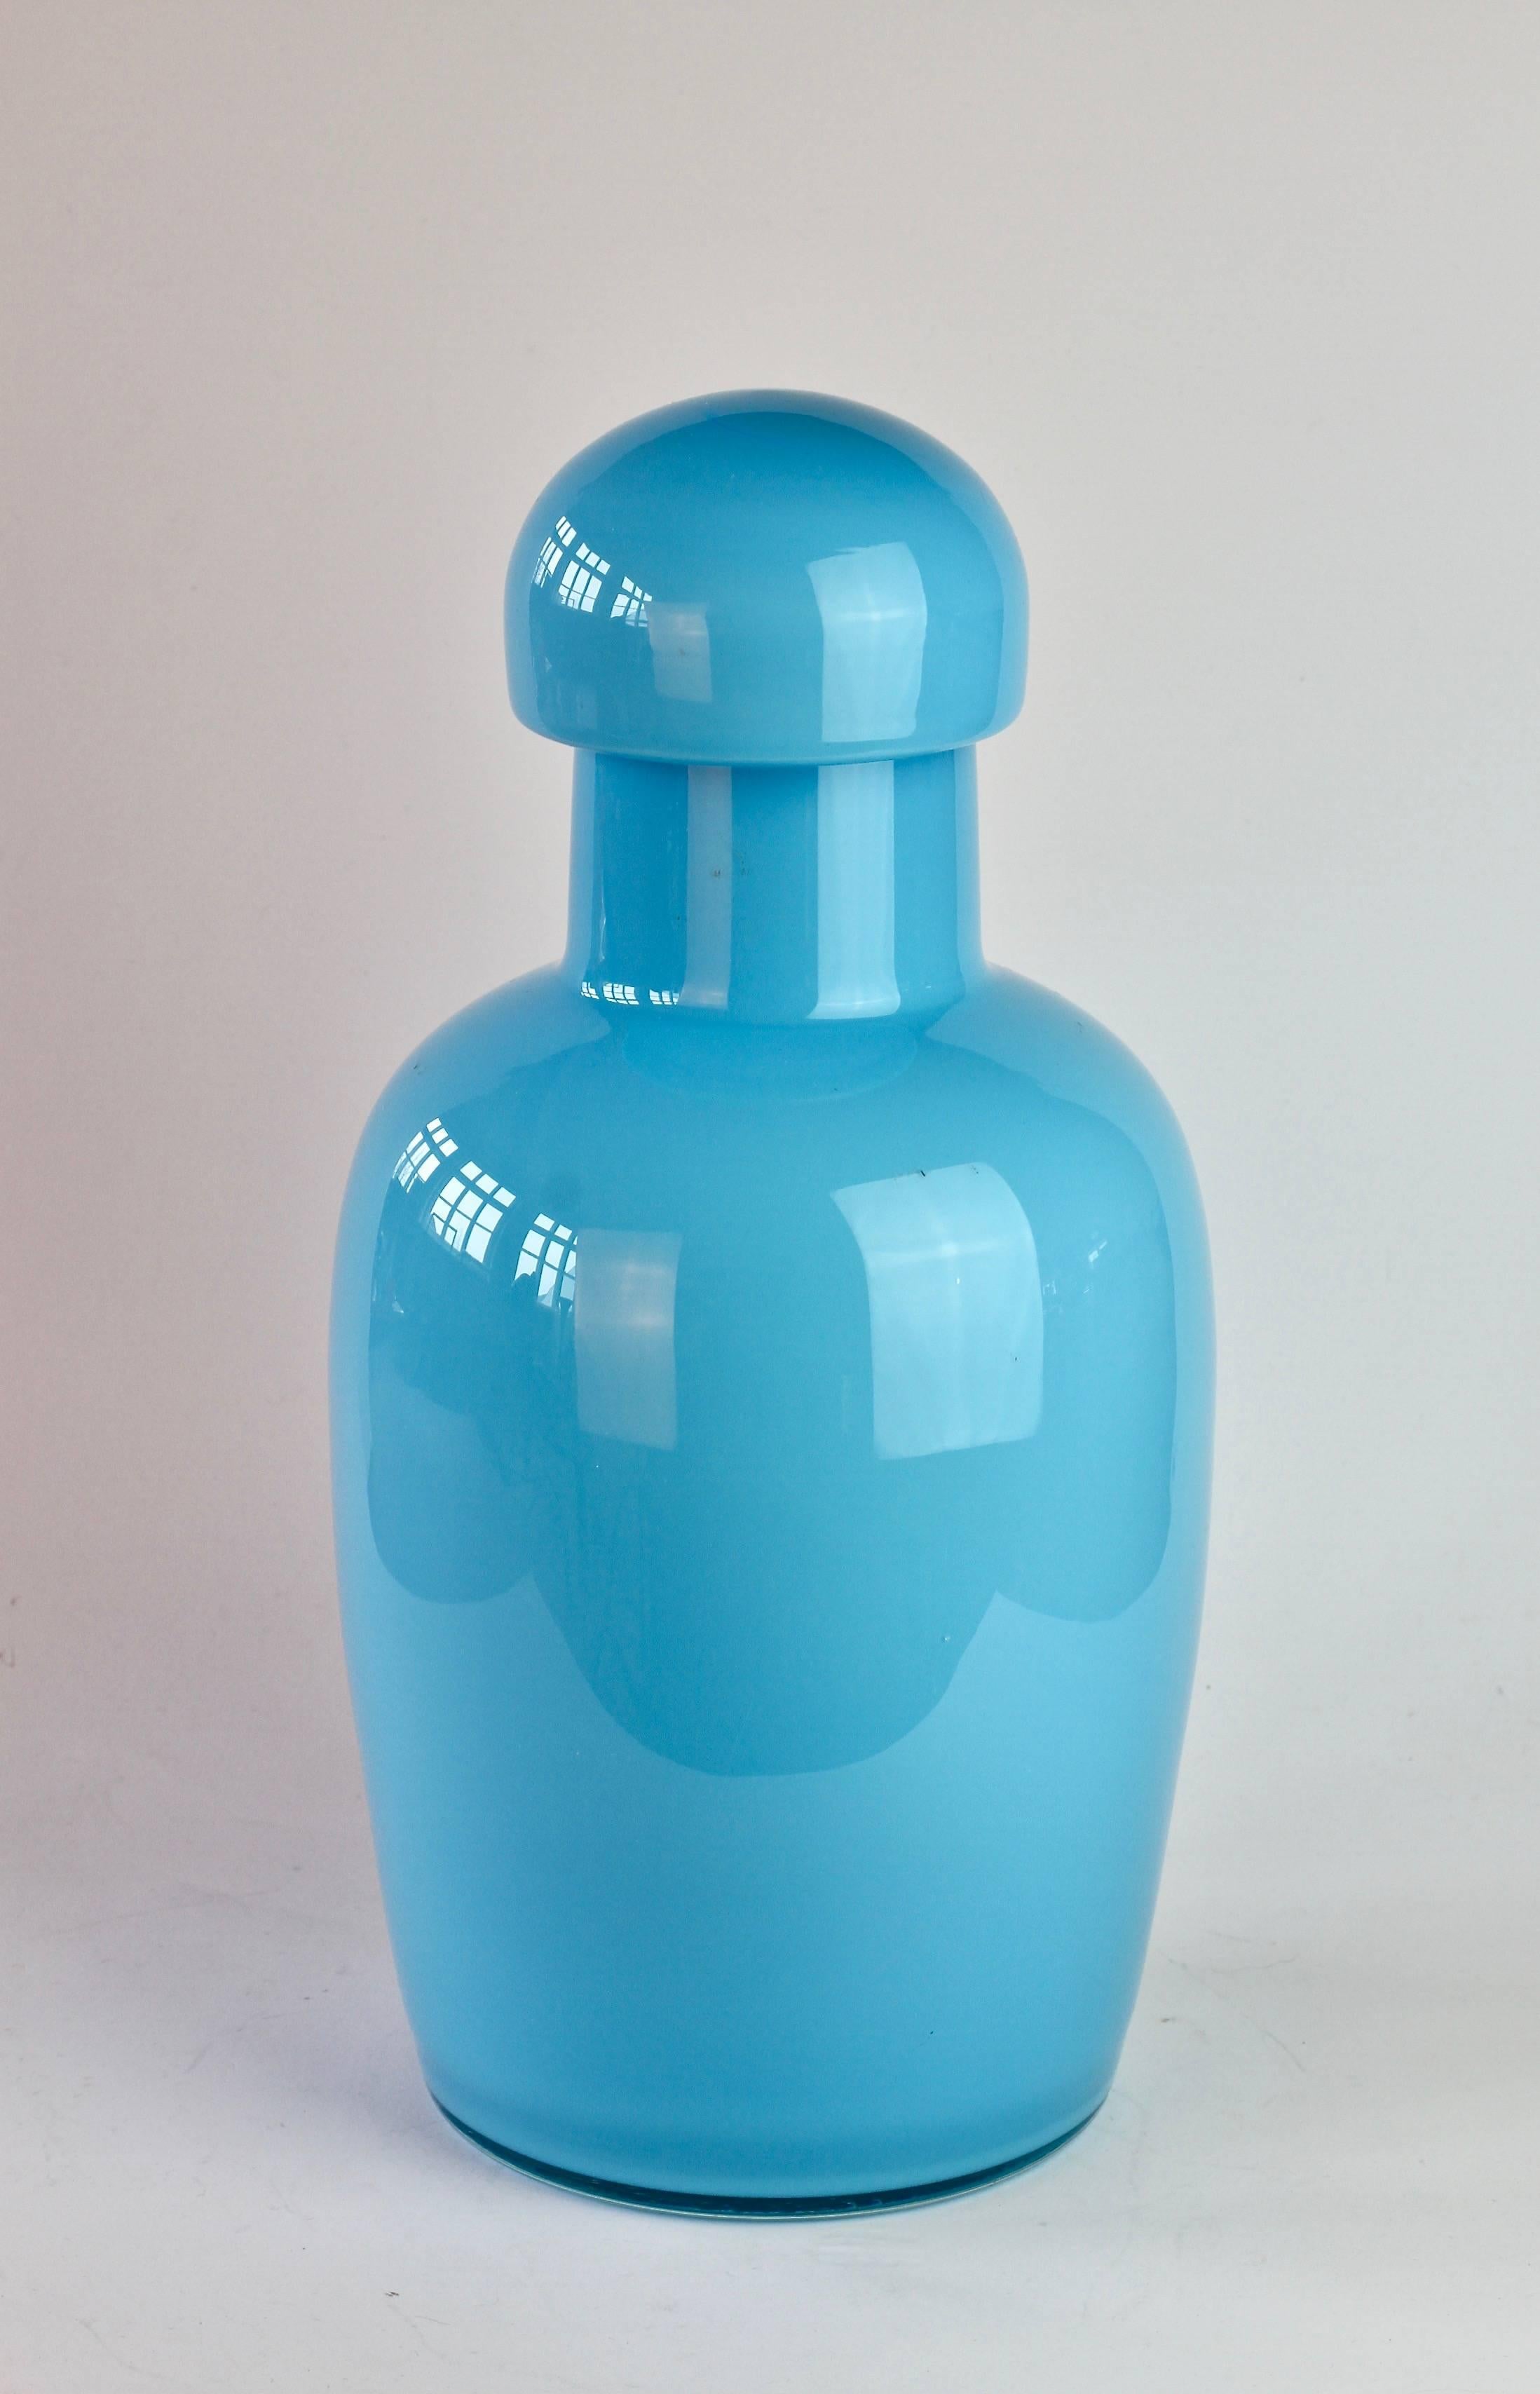 Wonderful tall light blue urn by Cenedese Vetri of Murano, Italy. A fun, funky and bright way to add a touch of bold colour / color to your interior - imagine glass like this on open, white shelving in a kitchen, bathroom or in a display